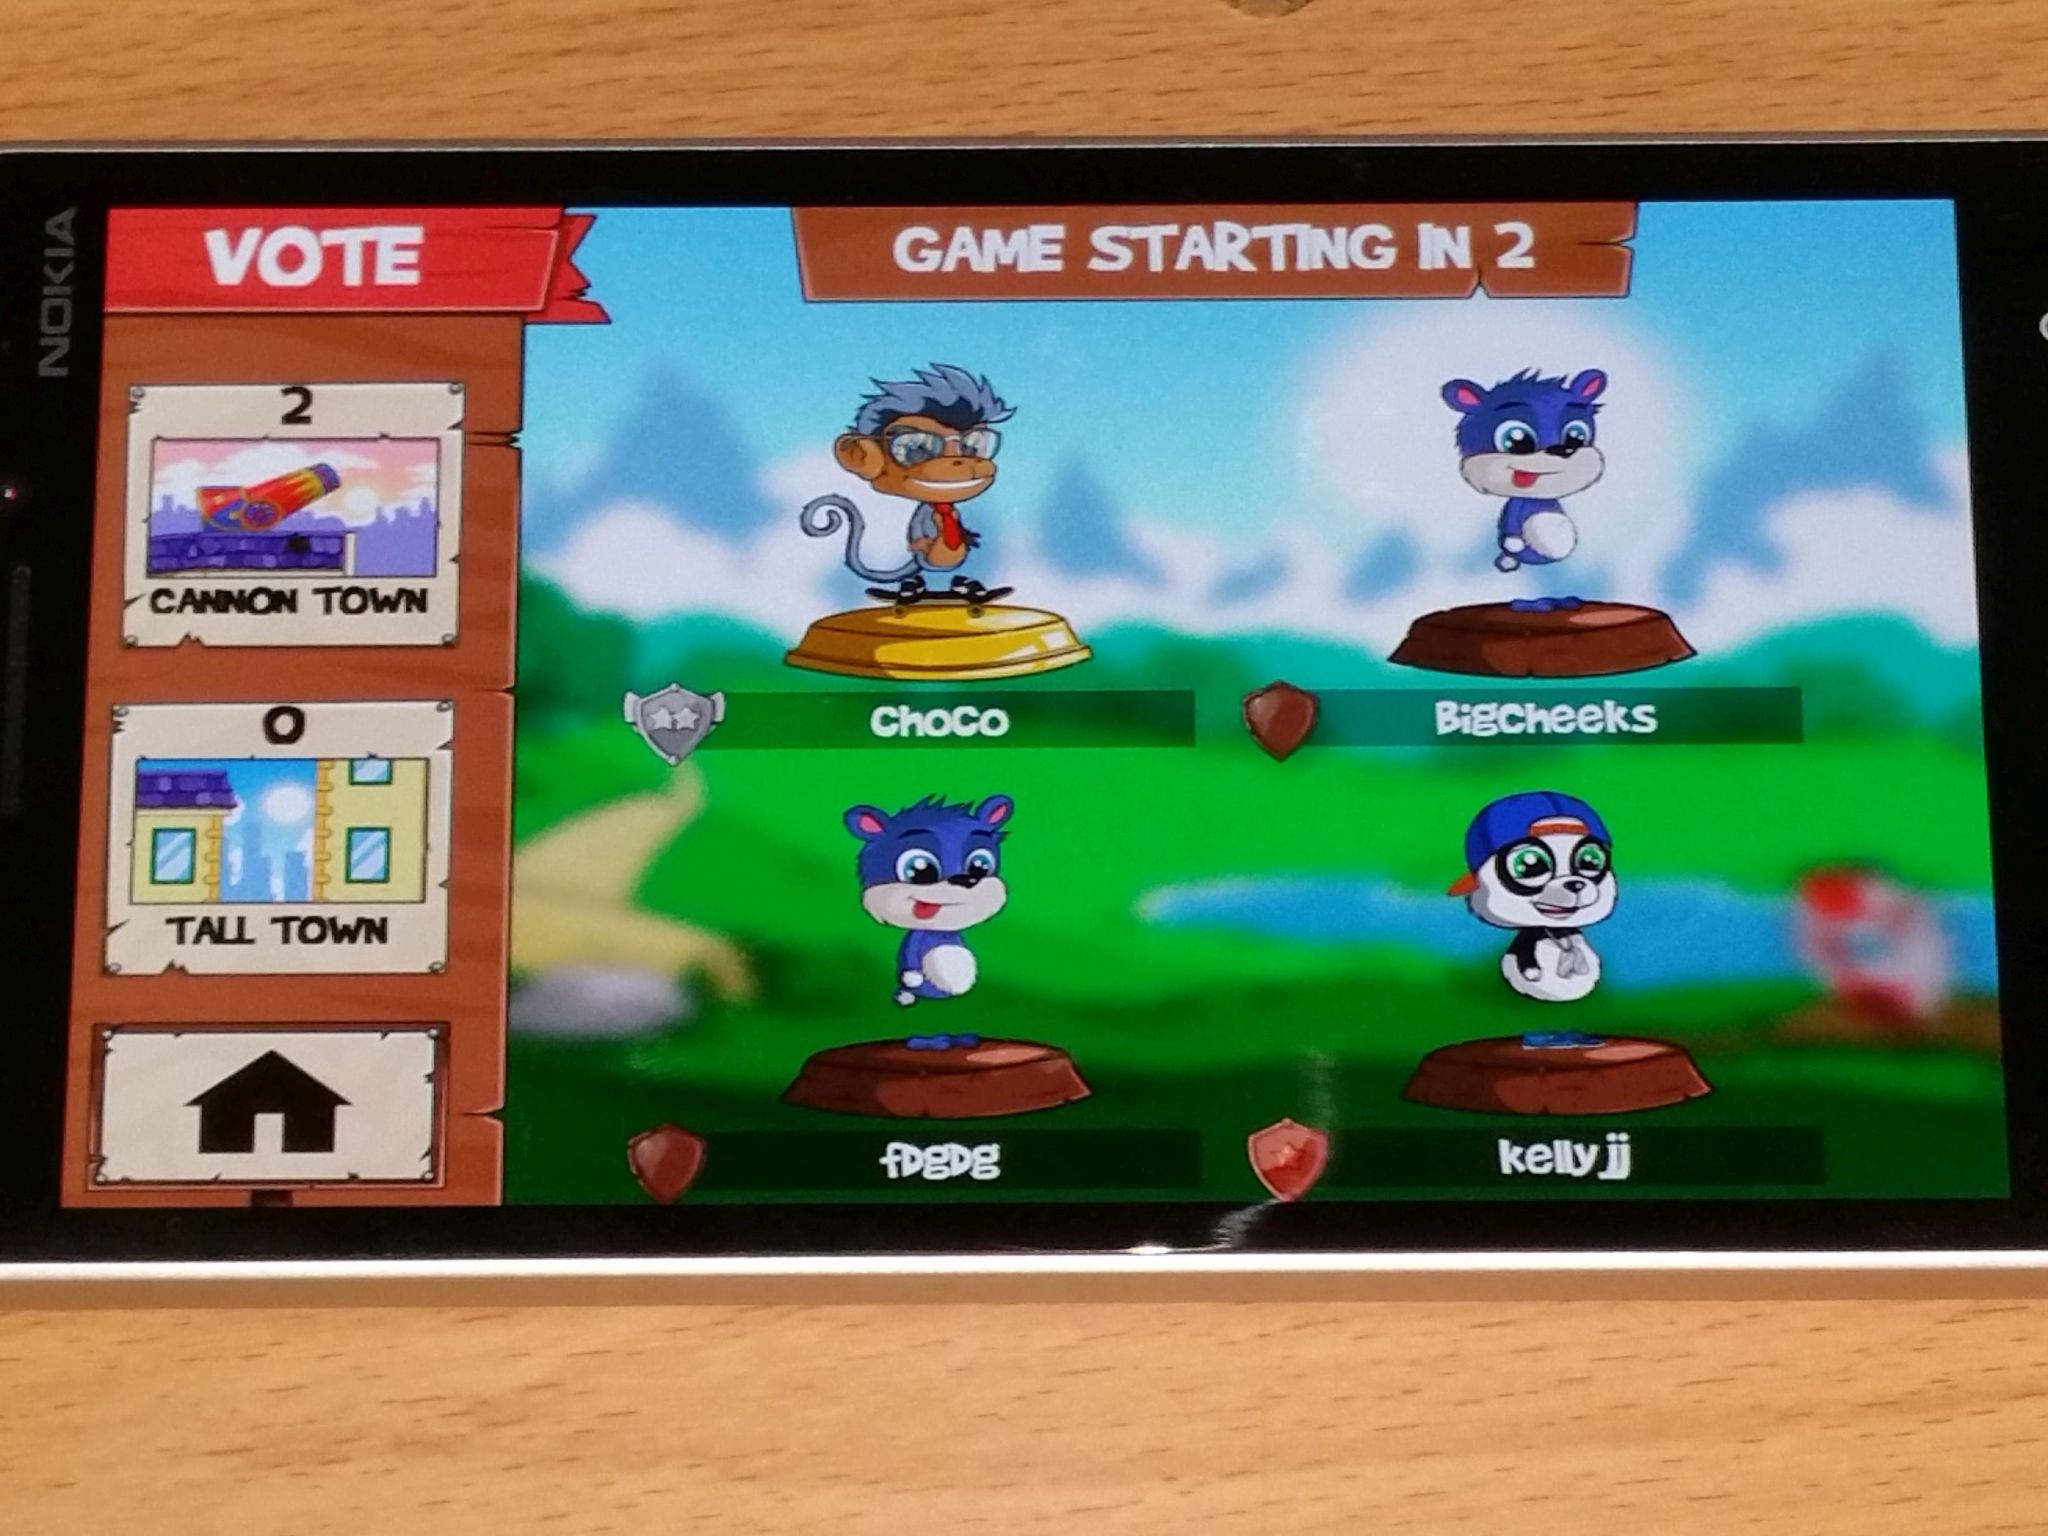 Fun Run 2 is a fast four-player online 